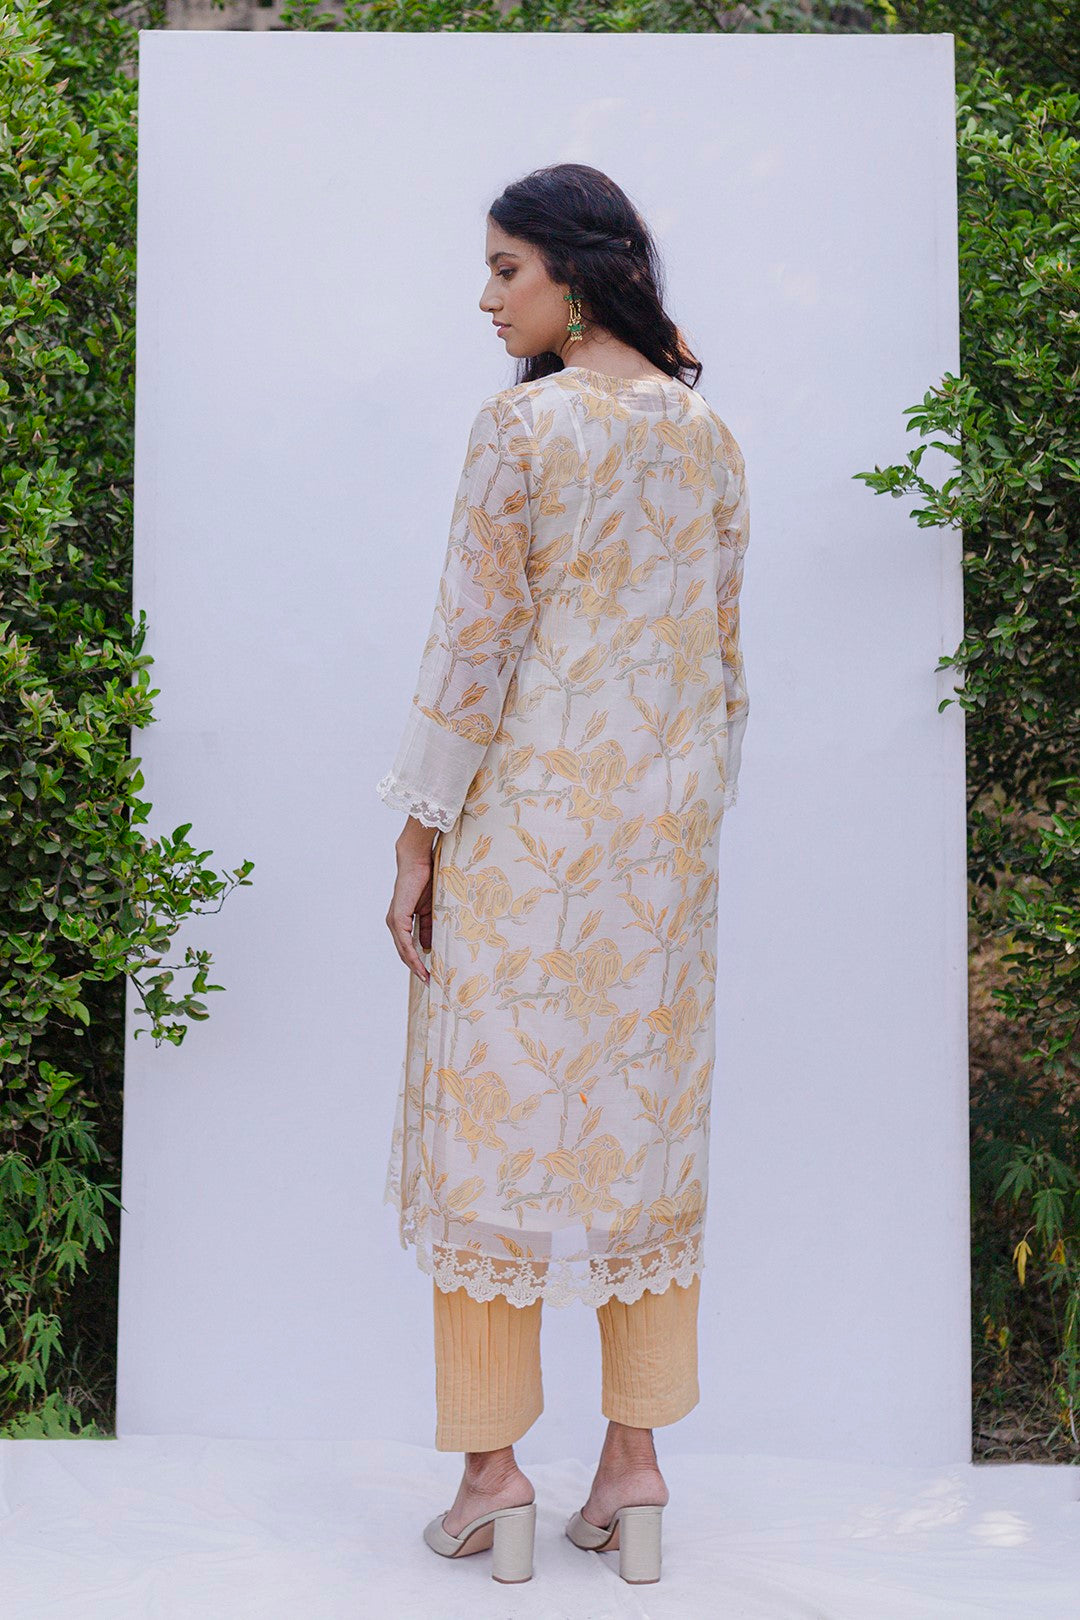 IVORY CHANDERI BLOCK PRINTED FLORAL YELLOW MAGNOLIA KURTA WITH COTTON PANTS AND LACE STOLE